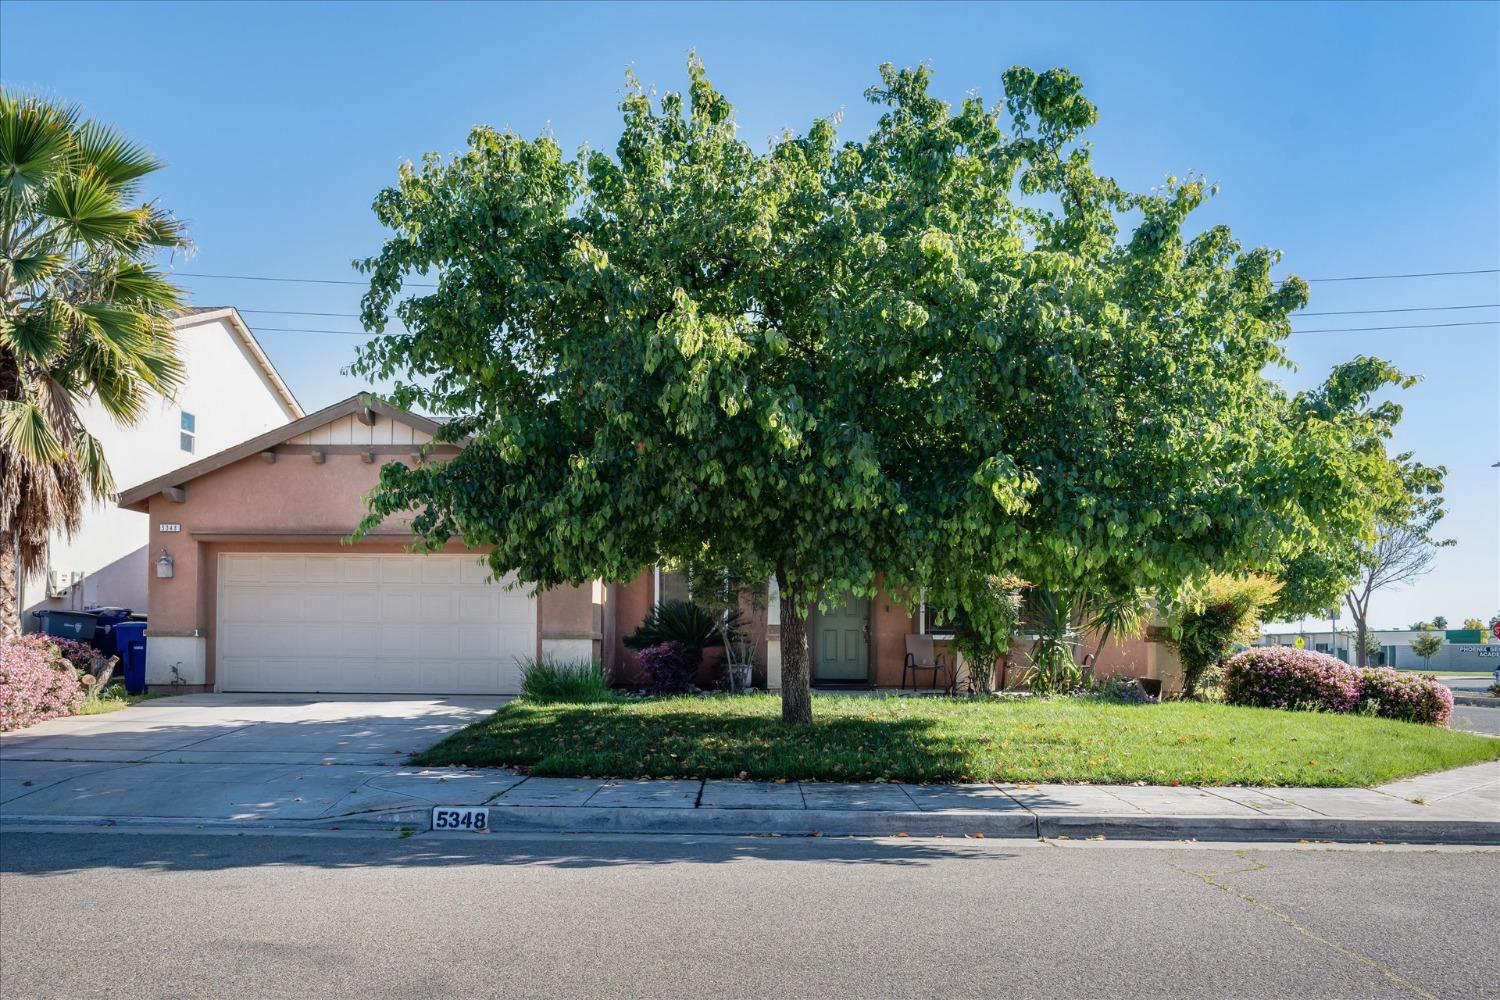 Photo of 5348 E Tower Ave in Fresno, CA